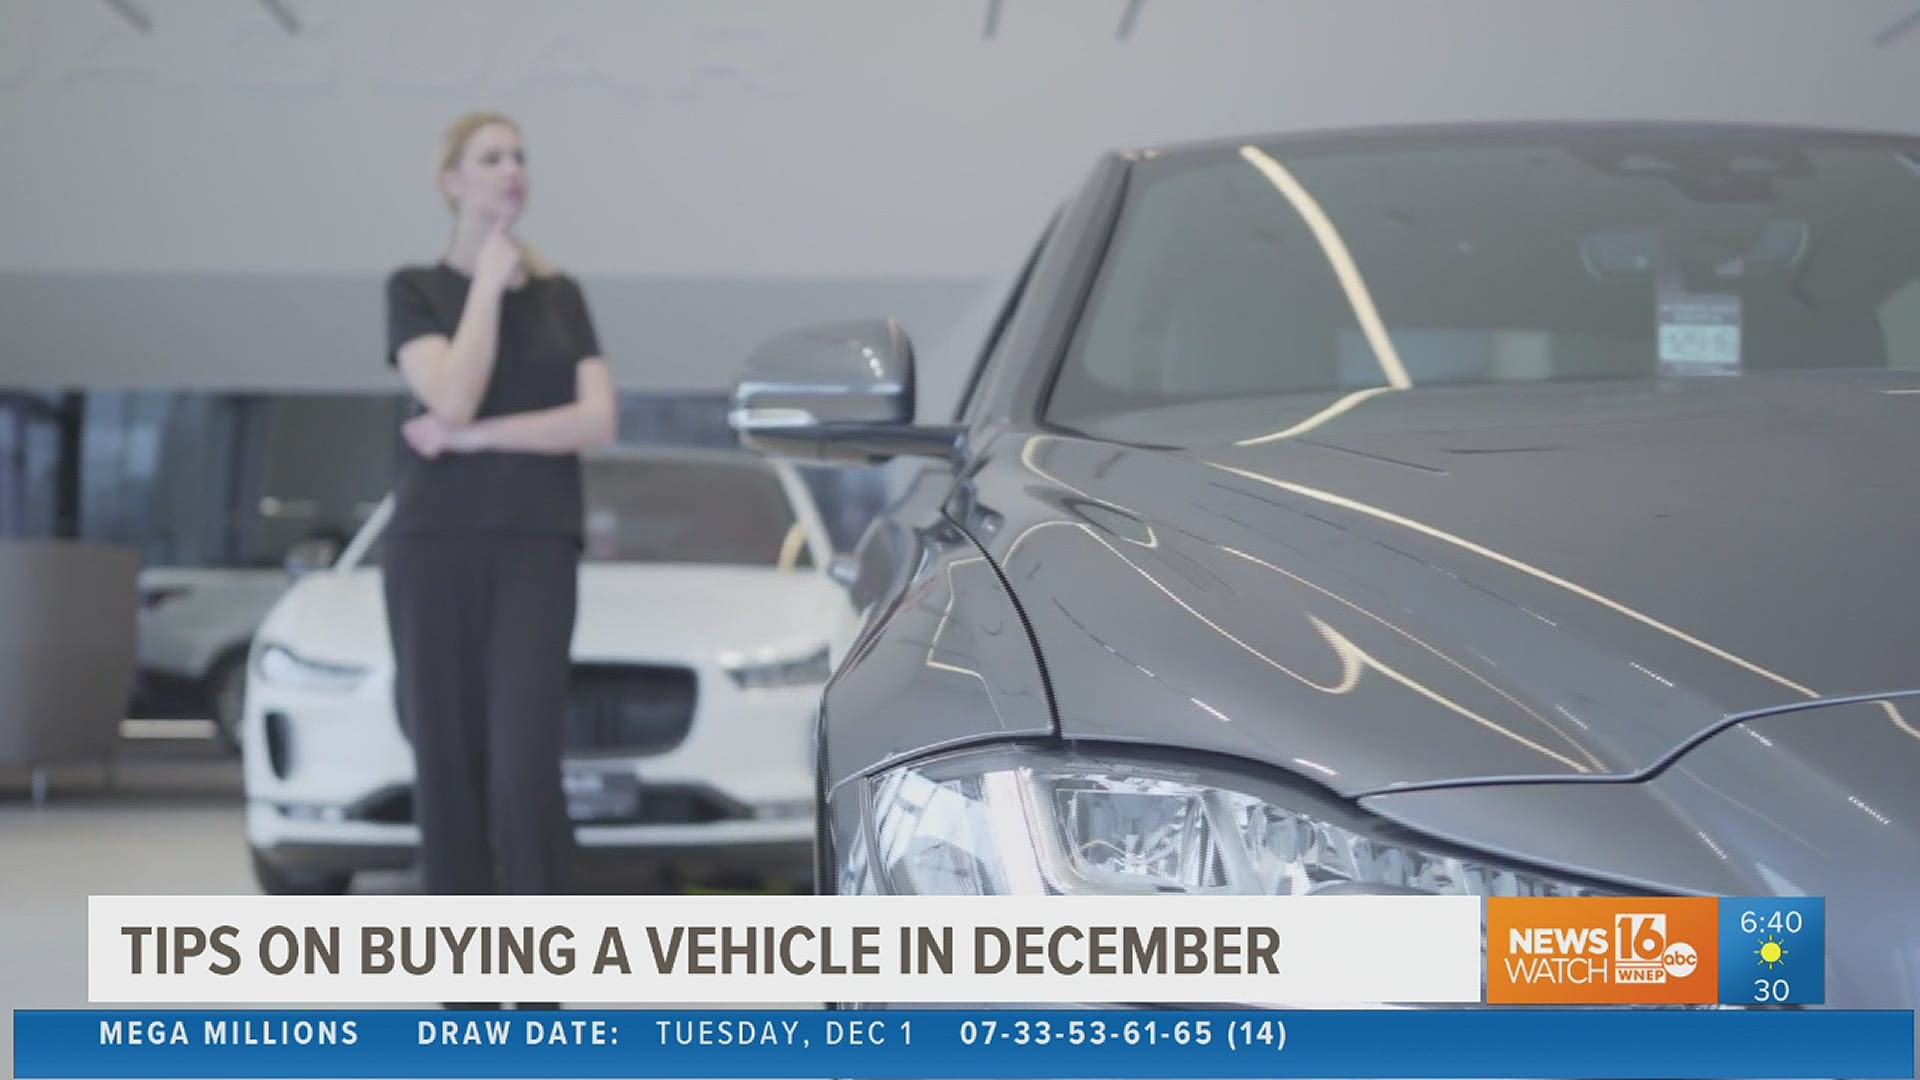 Newswatch 16's Ryan Leckey talked with three local experts who shared insider tips on how to bag big bargains on a new ride this month.